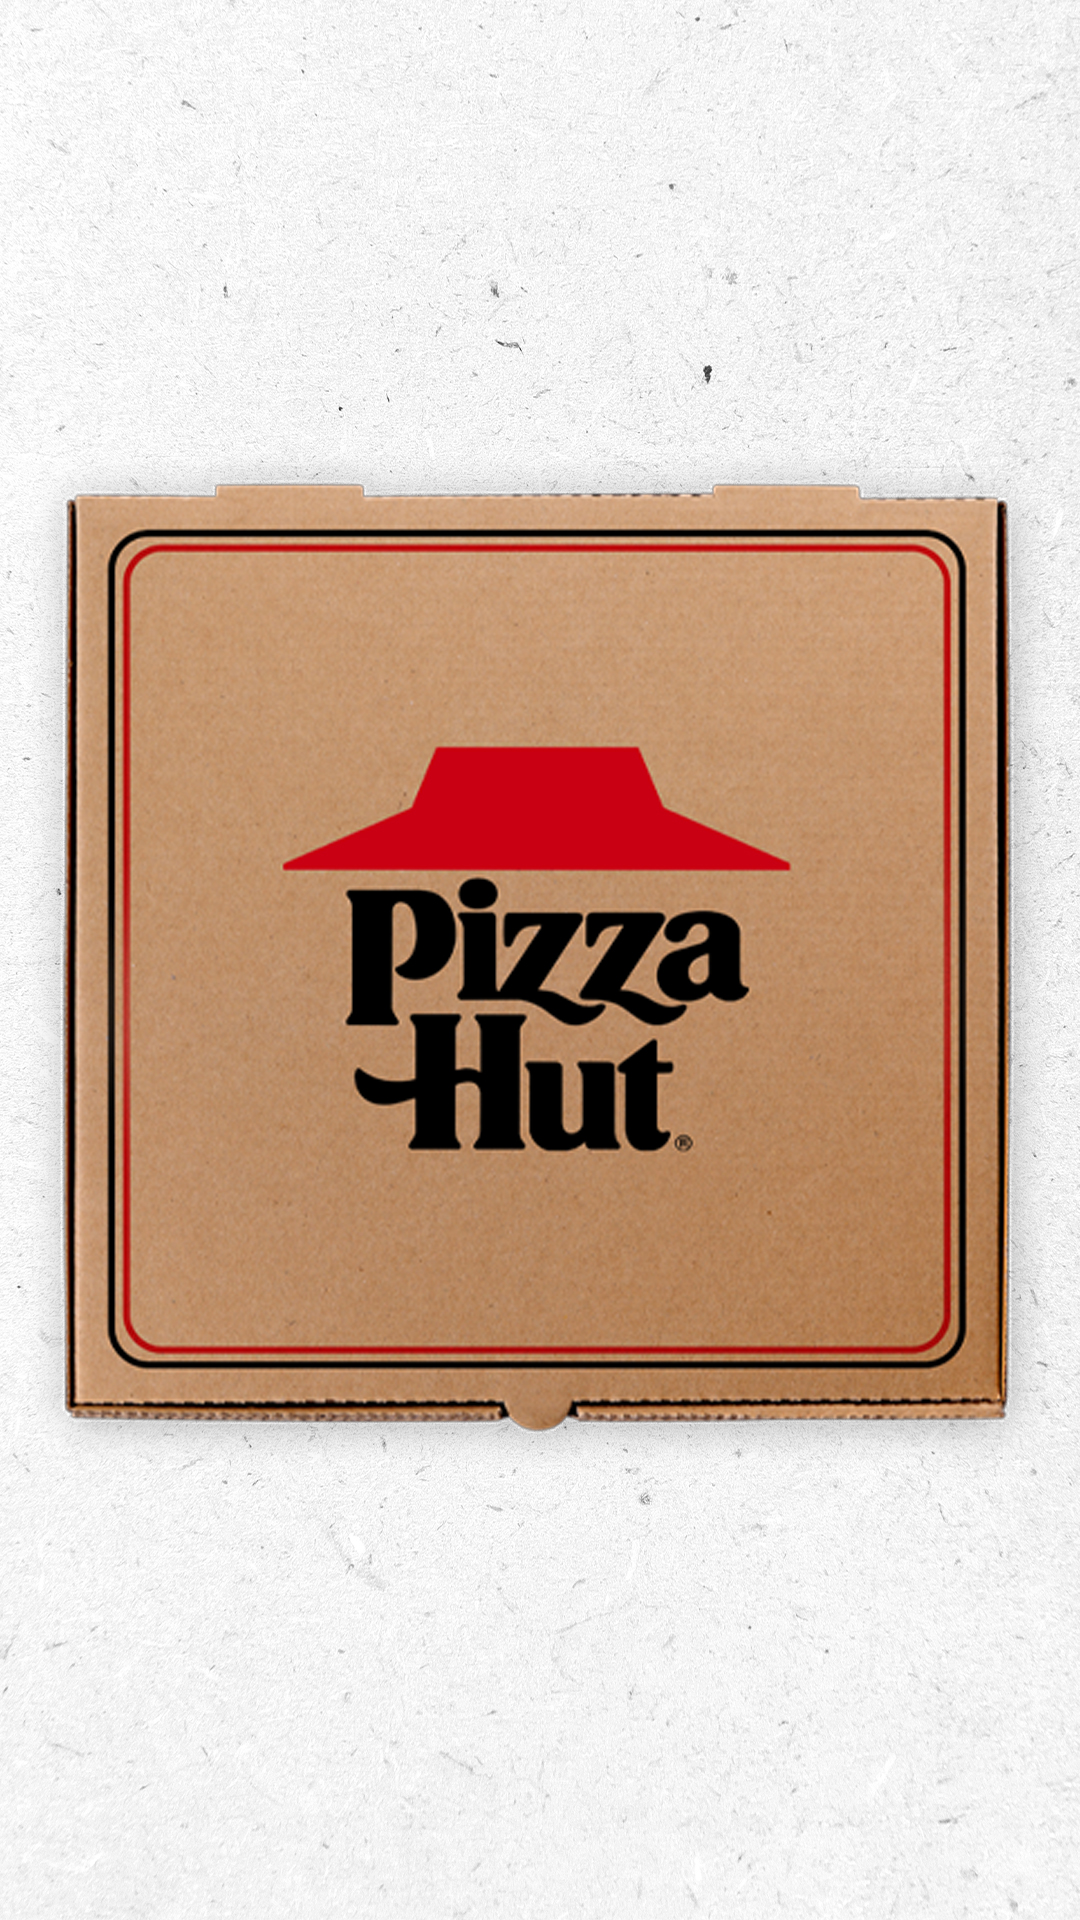 get-creative-with-our-pizzahutart-box-template-hut-life-official